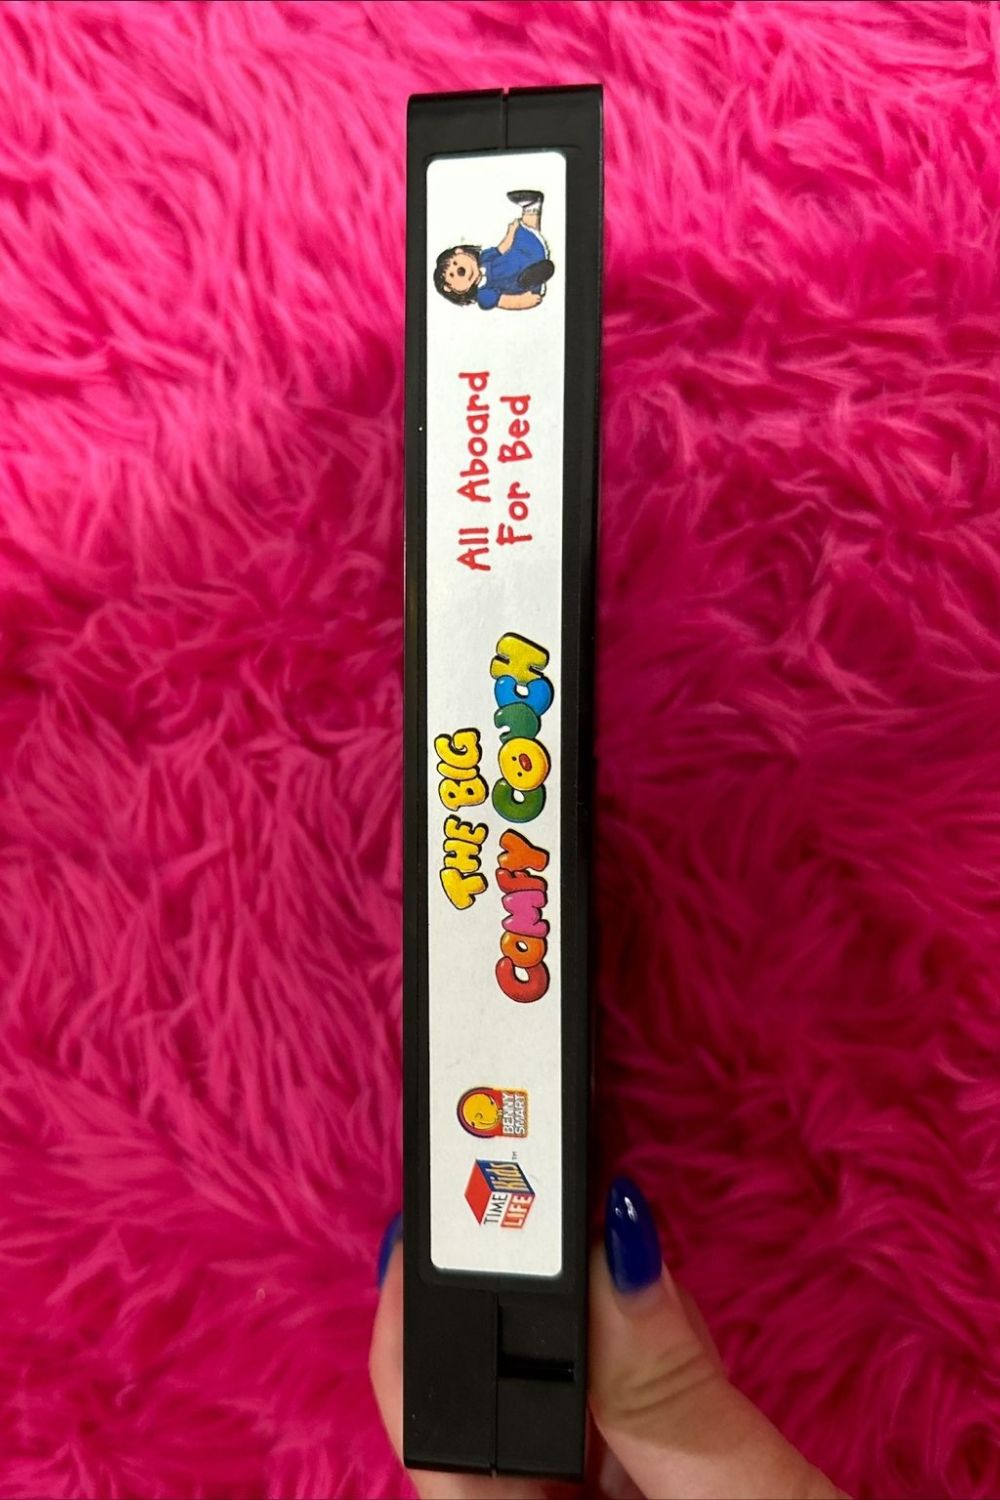 THE BIG COMFY COUCH "ALL ABOARD FOR BED" VHS*